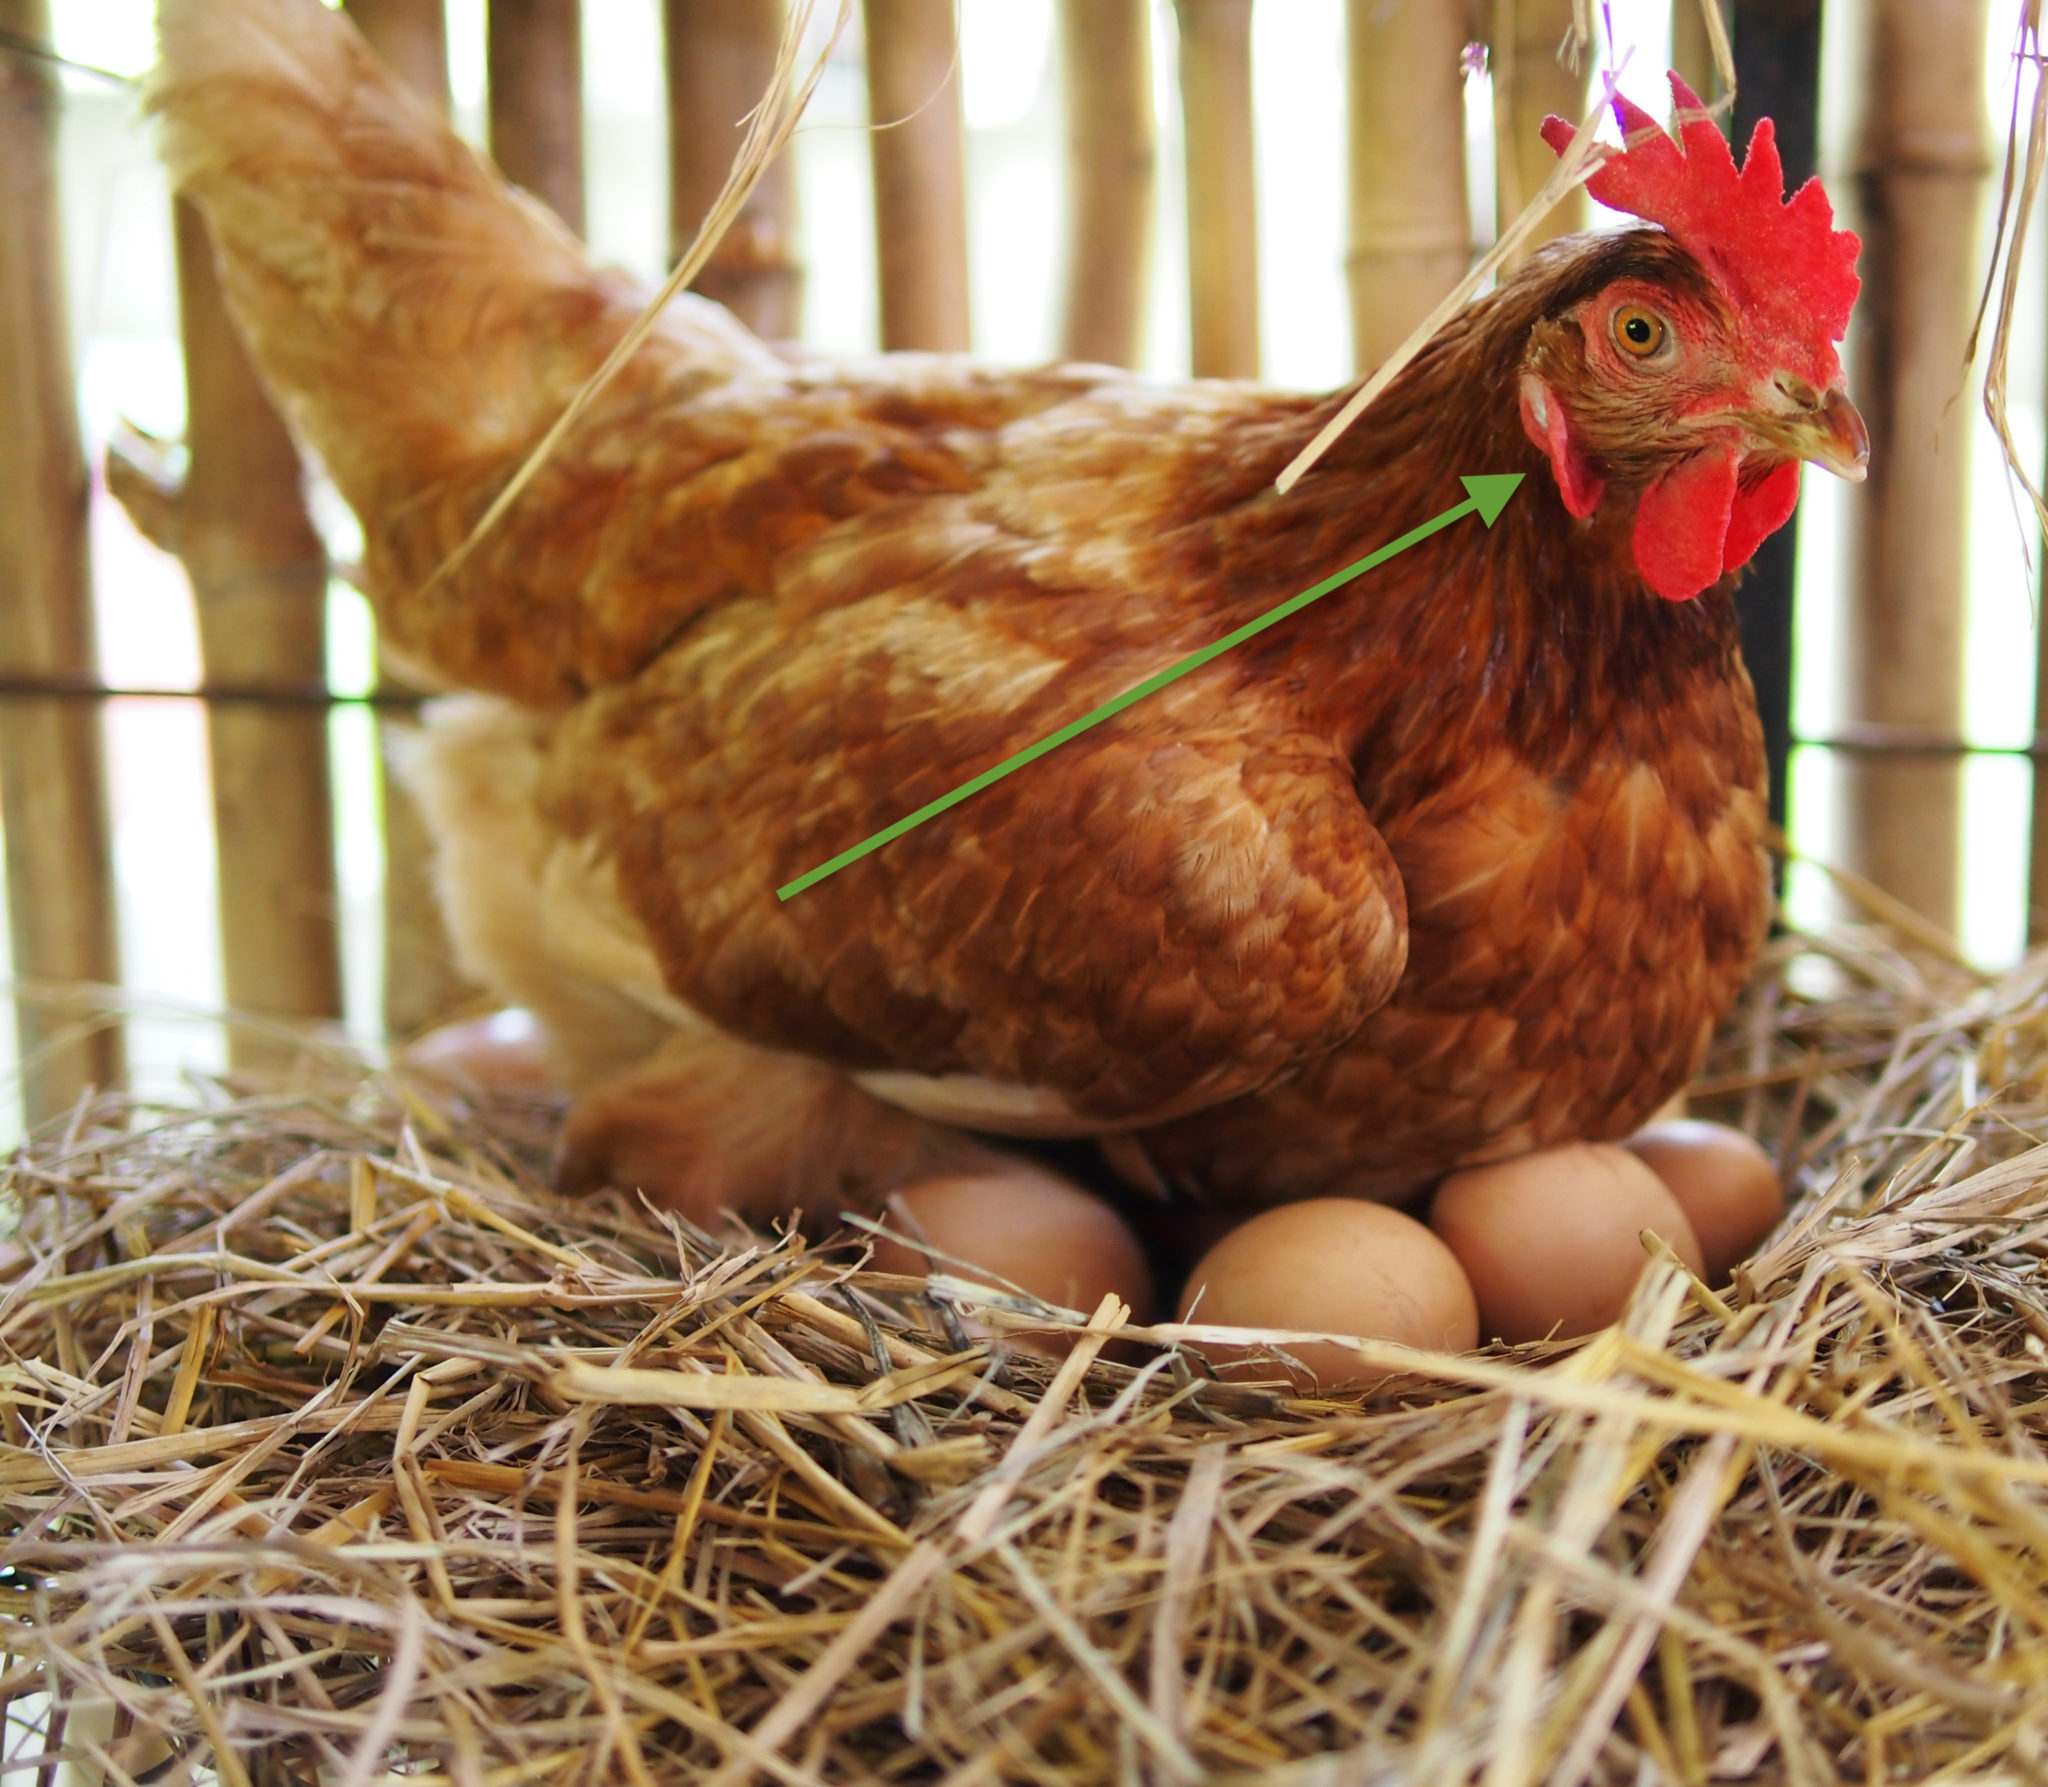 What Color Eggs do Chickens Lay? | Small Pet Select